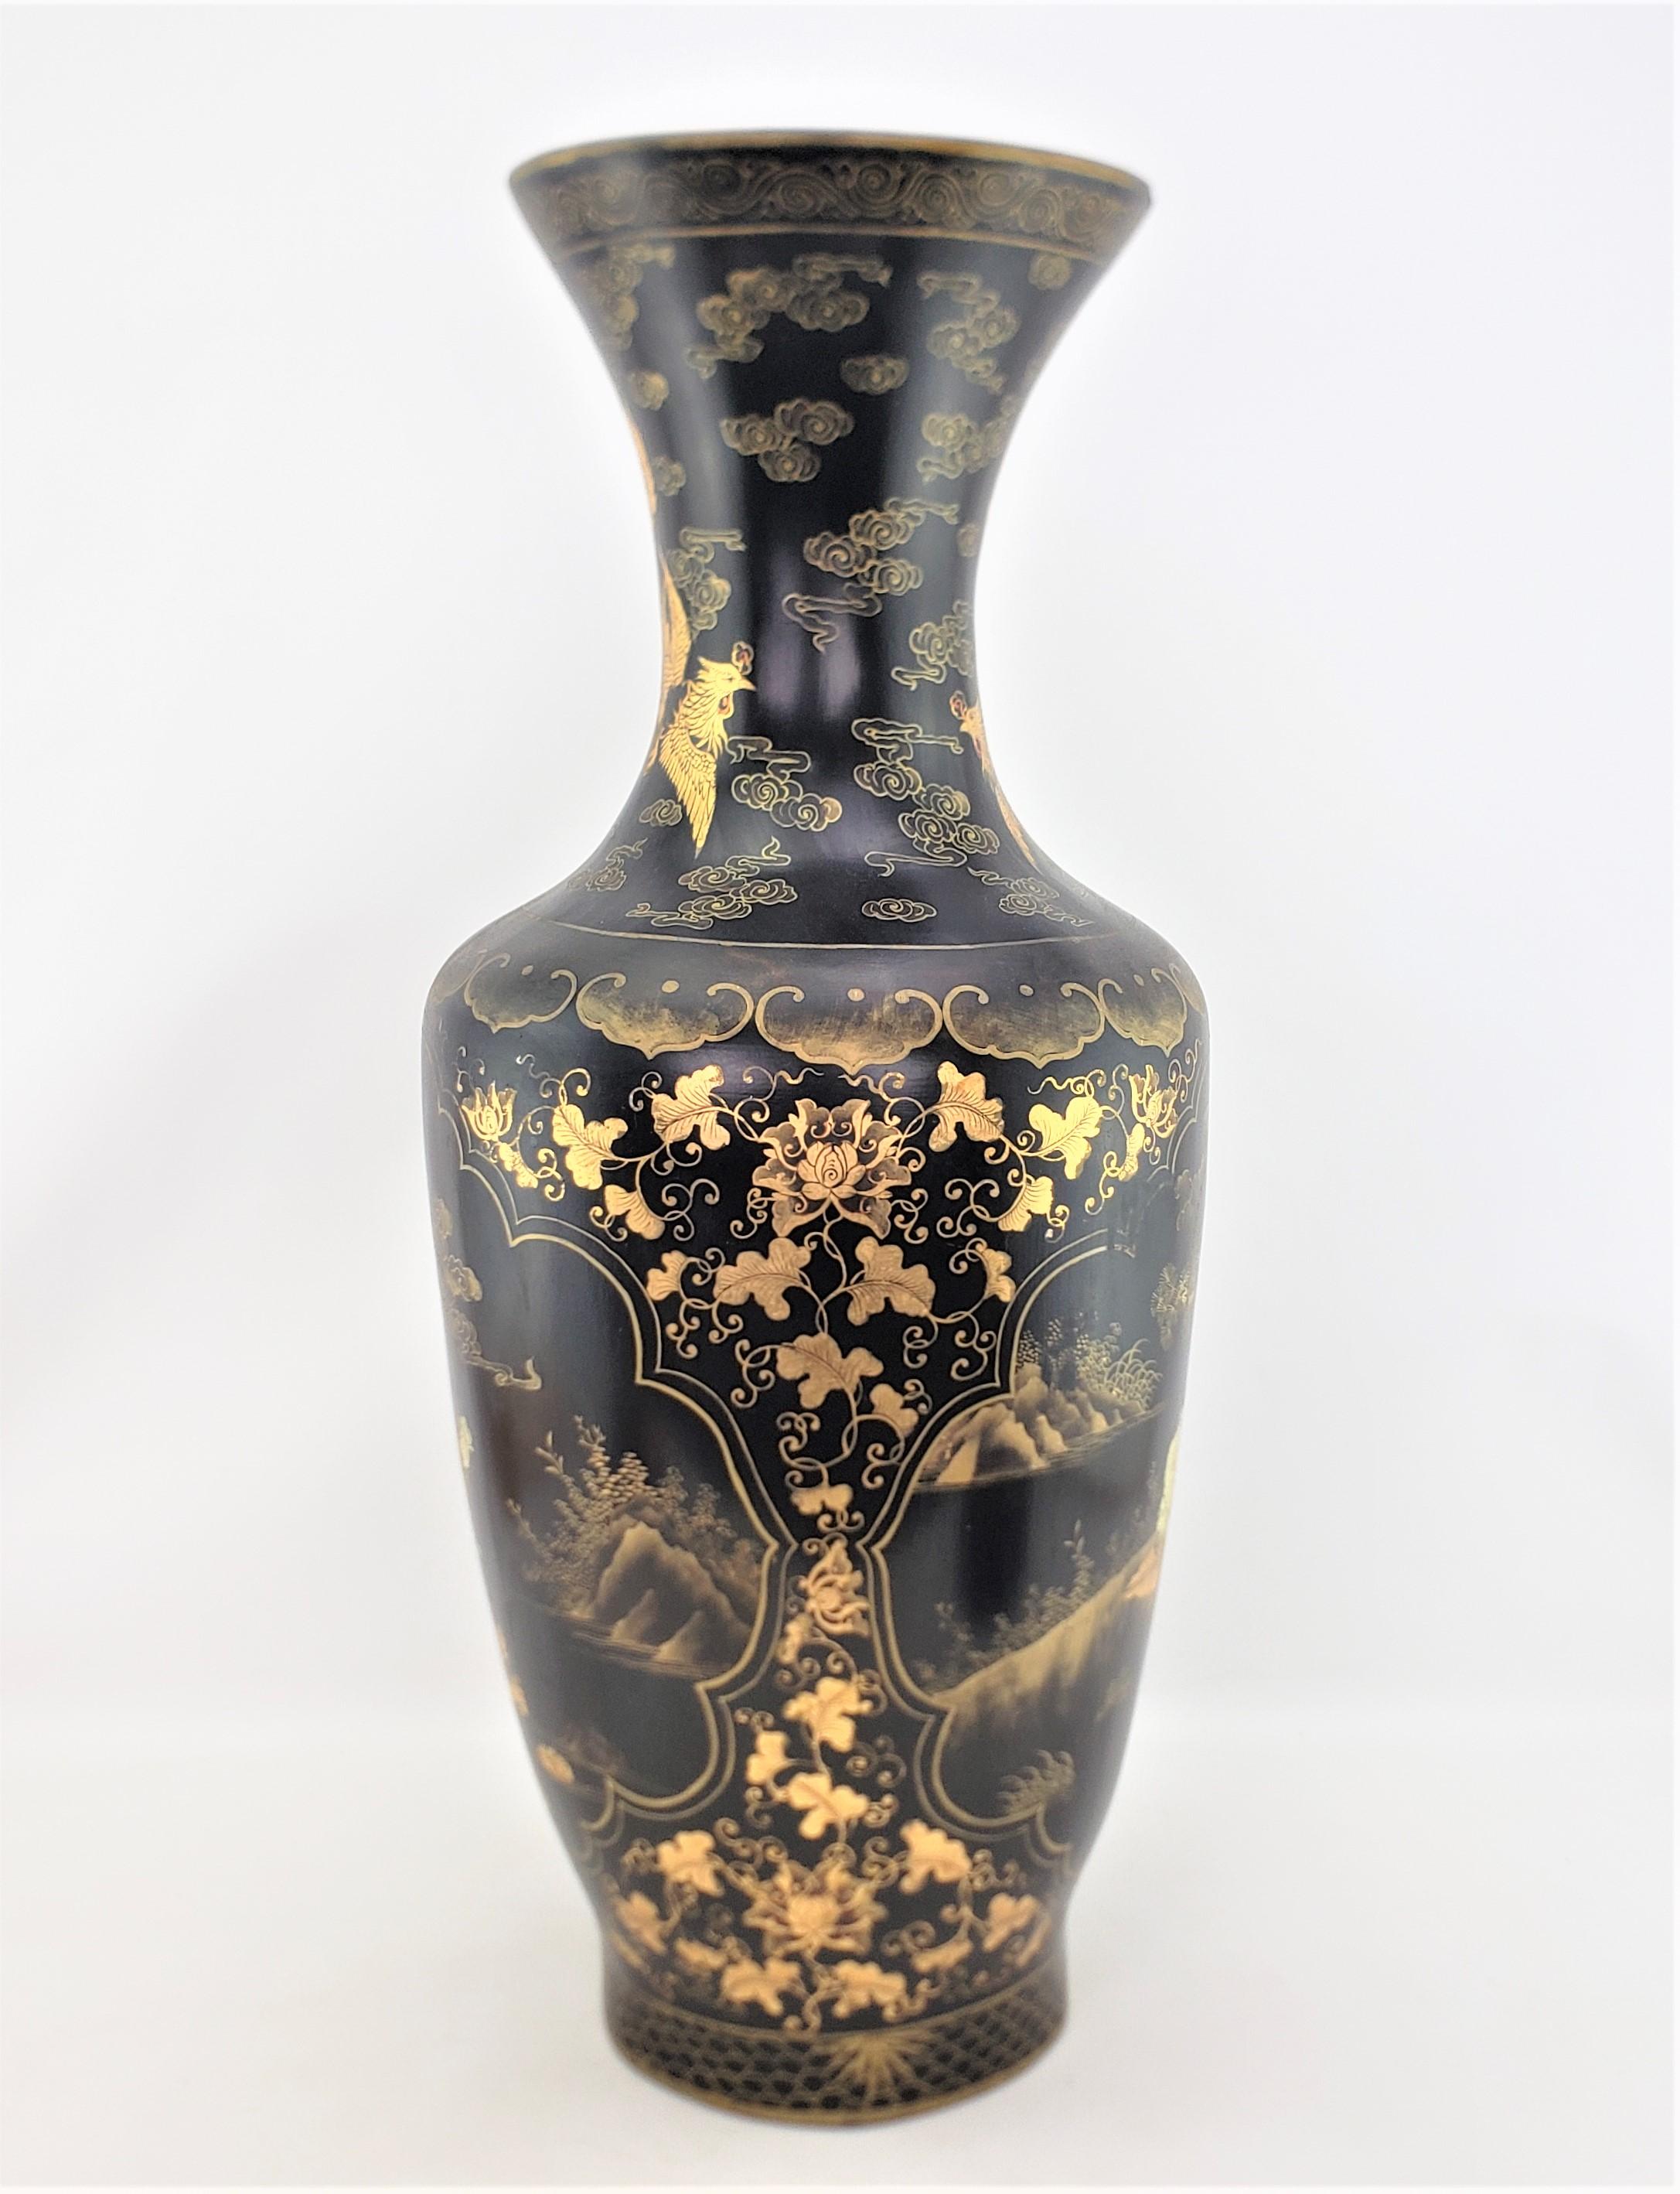 Huge Antique Chinese Paper Mache Floor Vase with Hand-Painted Gilt Decoration In Good Condition For Sale In Hamilton, Ontario